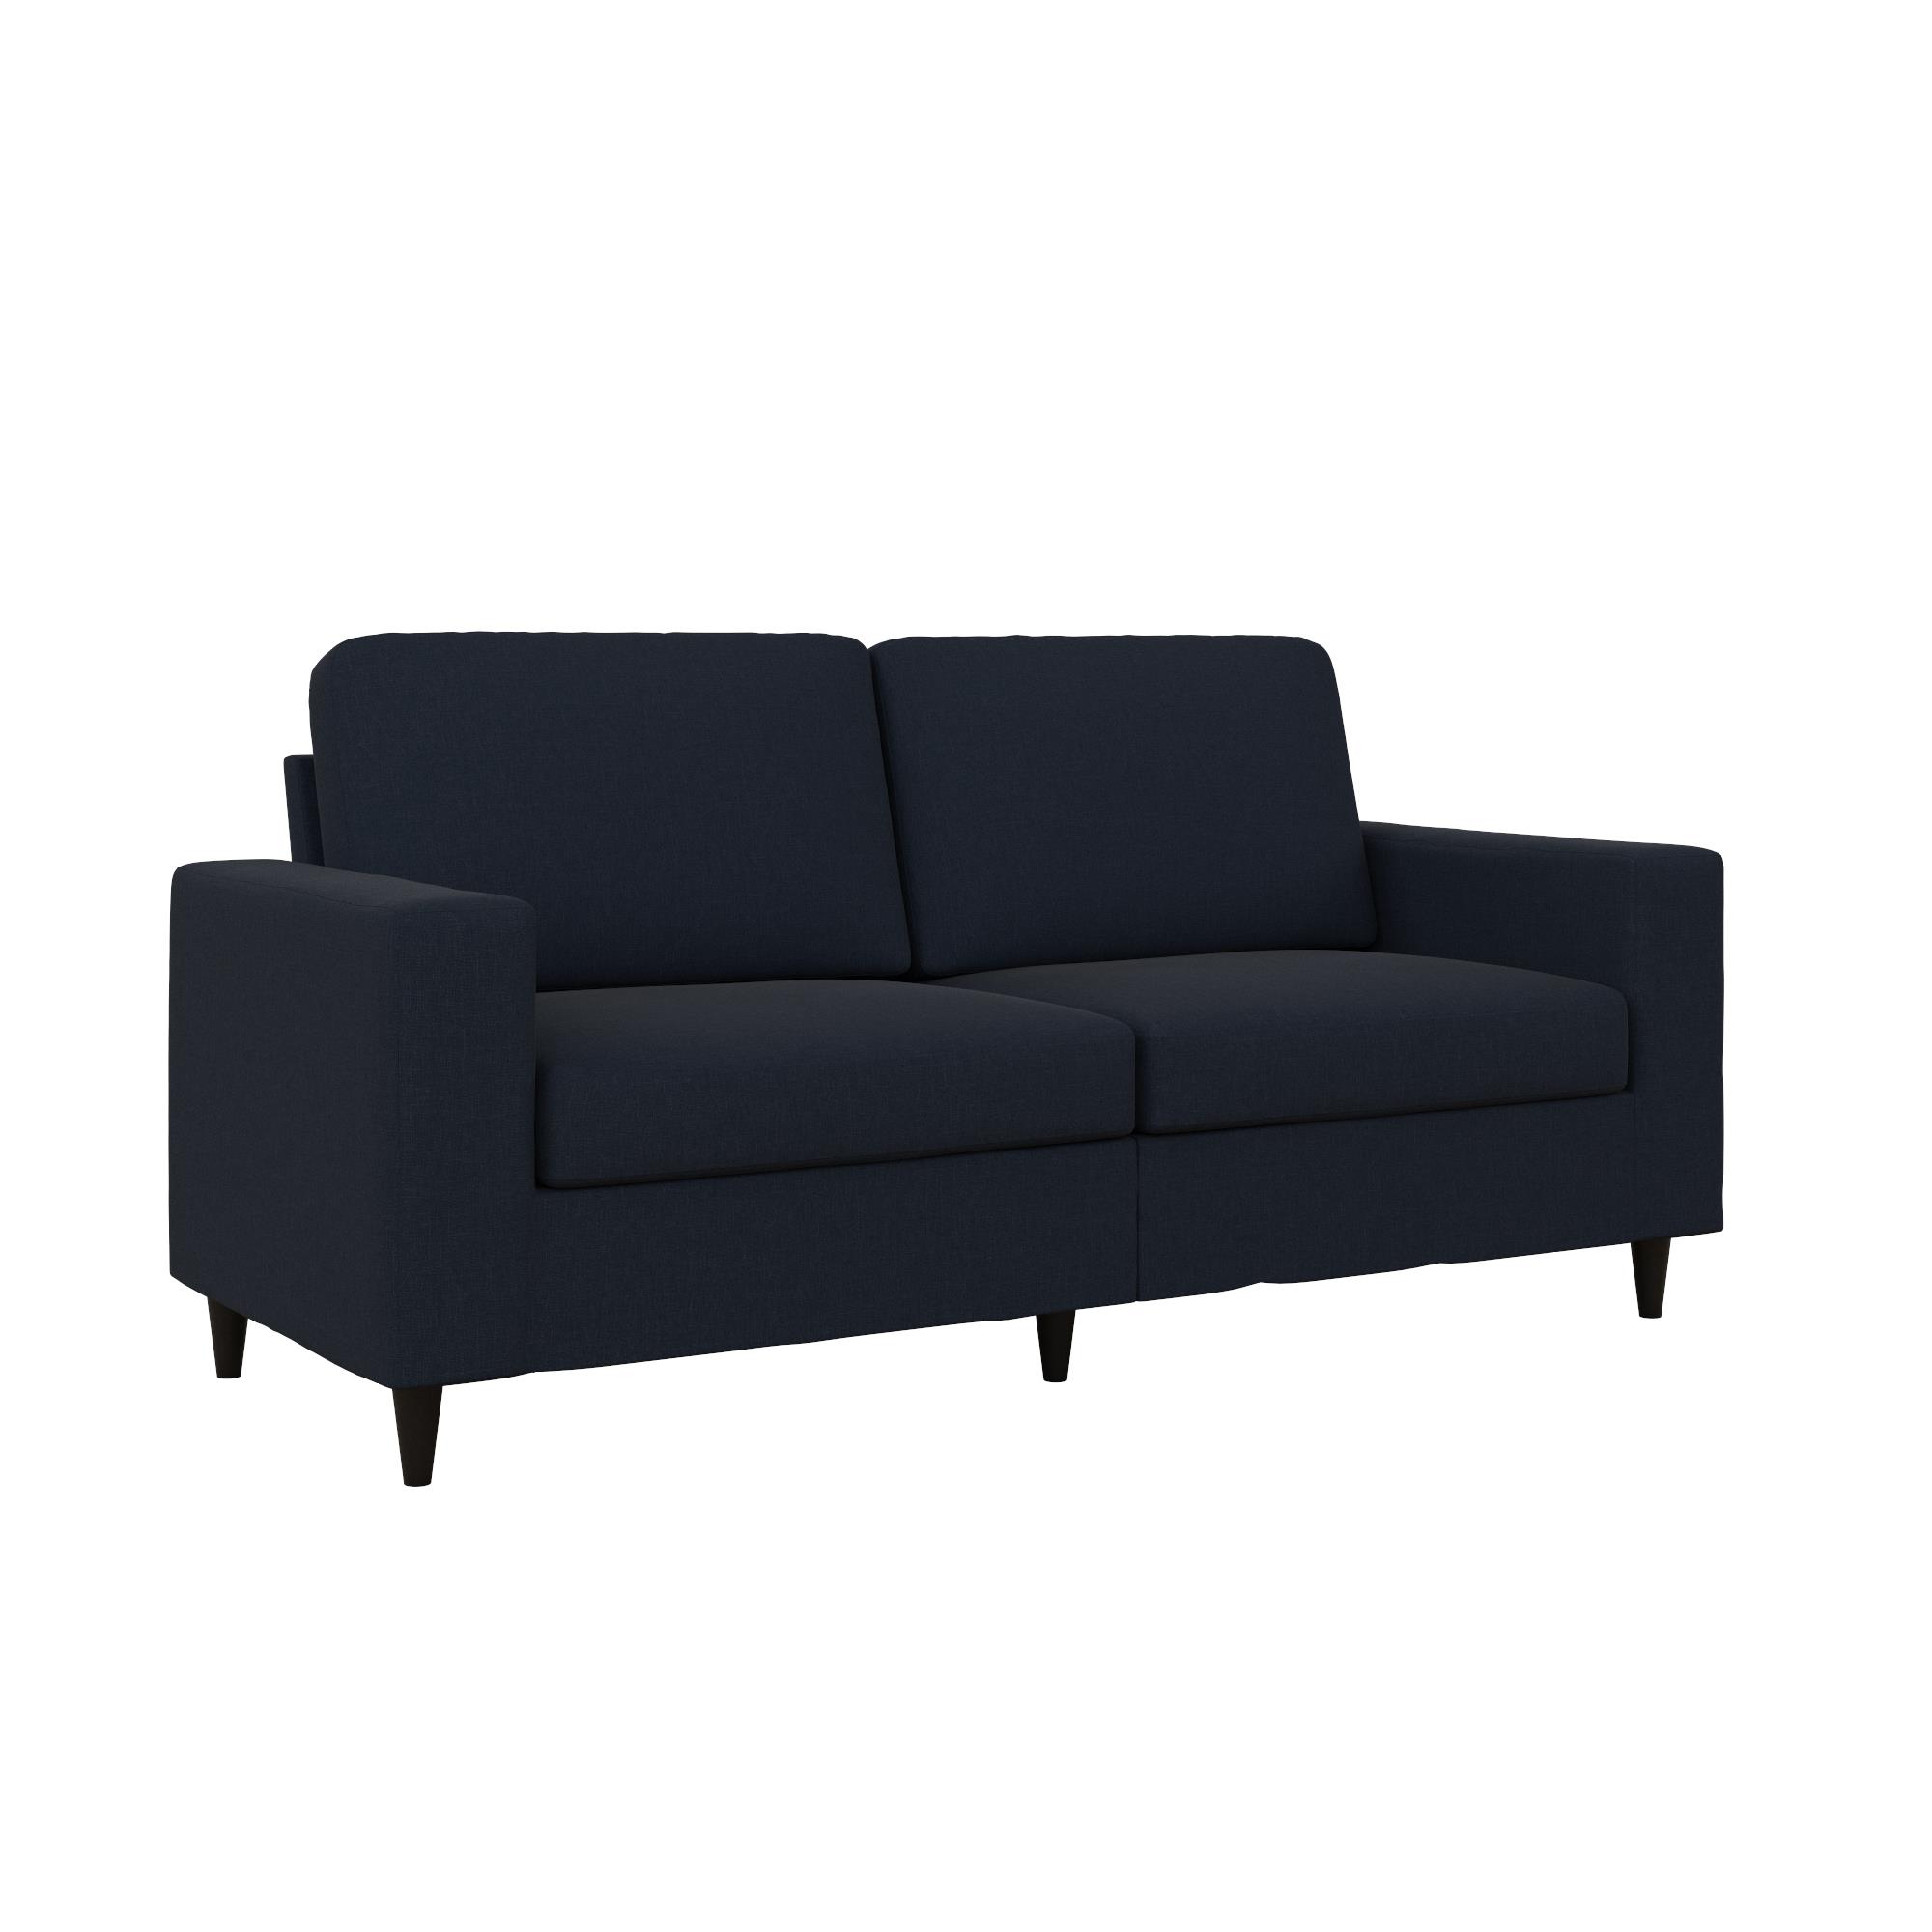 DHP Cooper 3 Seater Sofa, Blue Linen - image 5 of 18